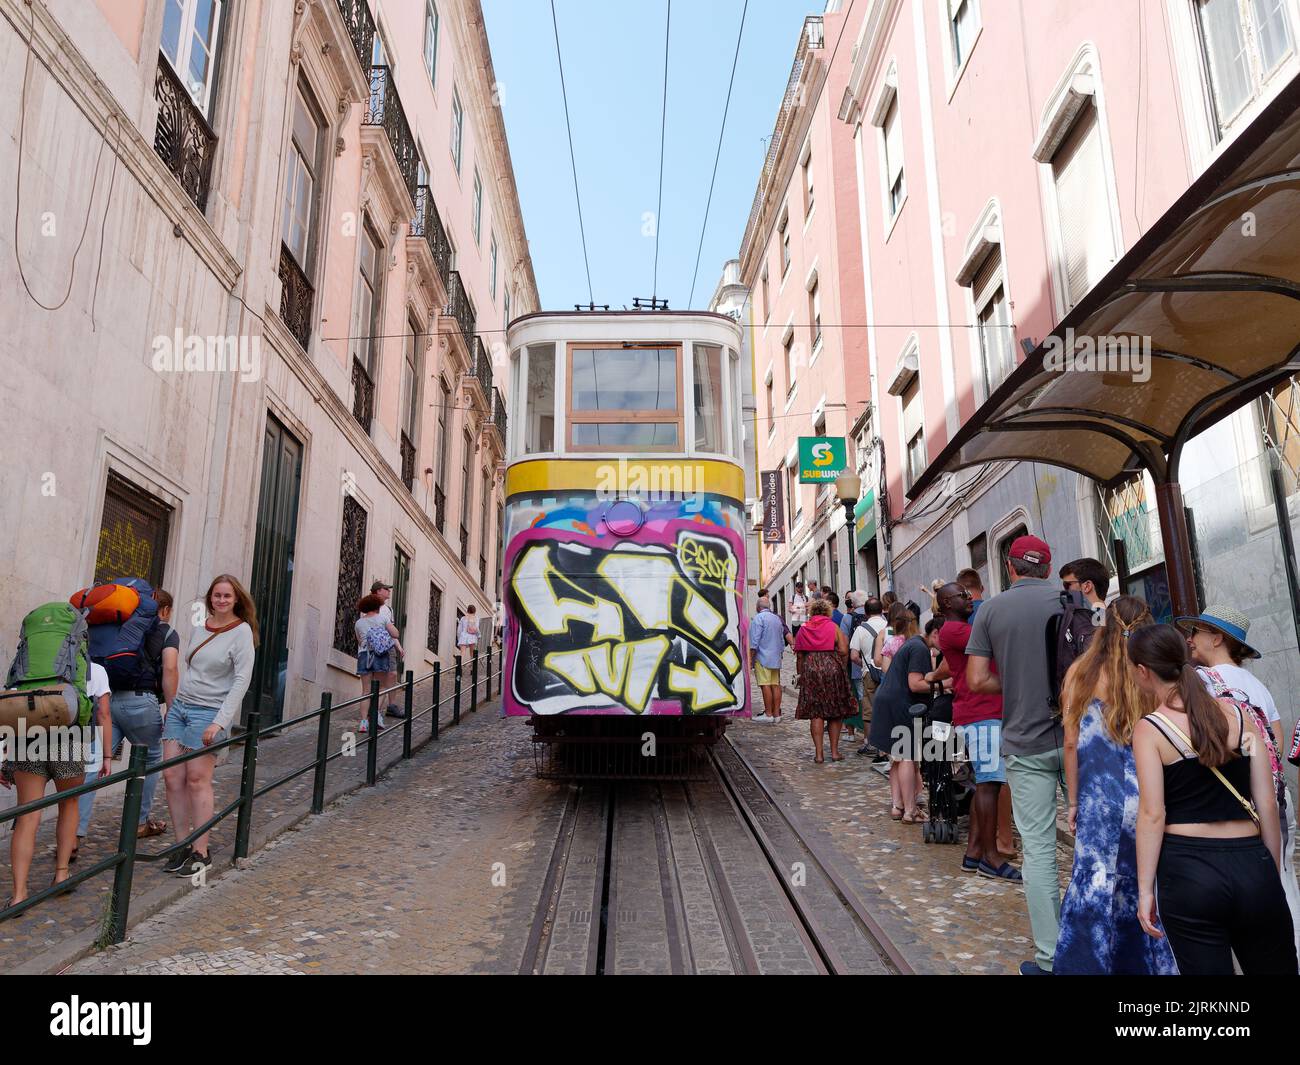 Tram aka Streetcar aka Trolley in Lisbon. People gather by the stop and tourists with back packs walk past. Portugal Stock Photo